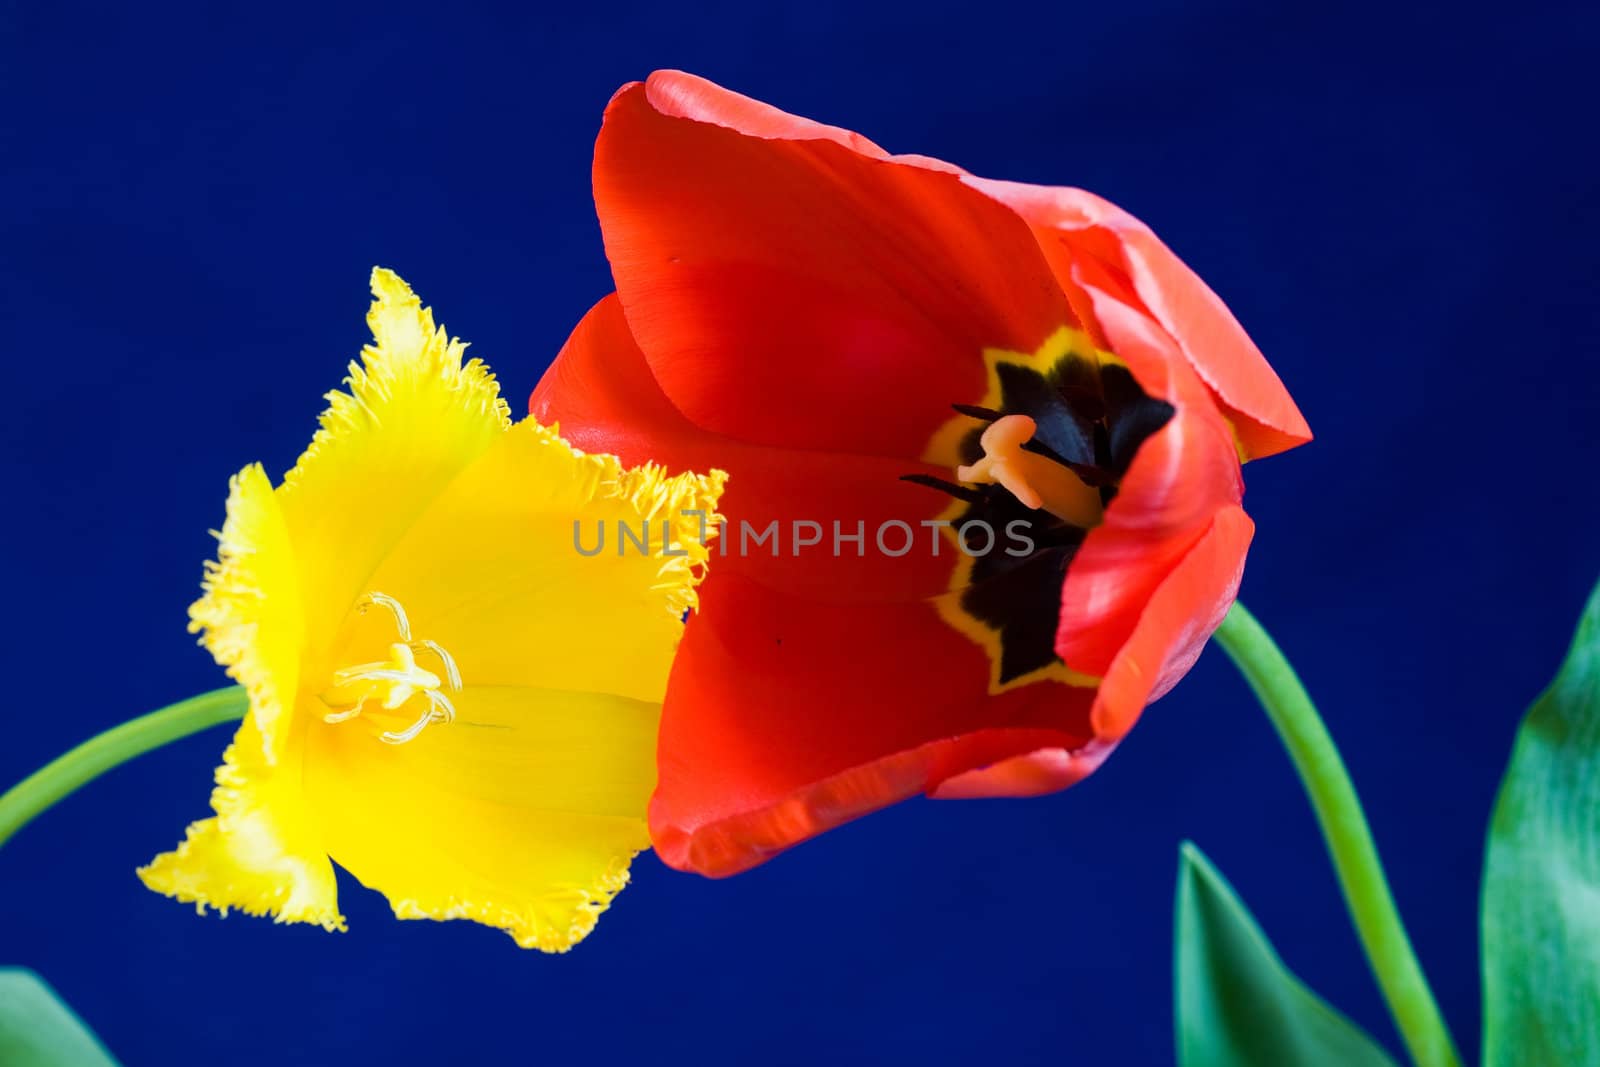 Two tulips by velkol